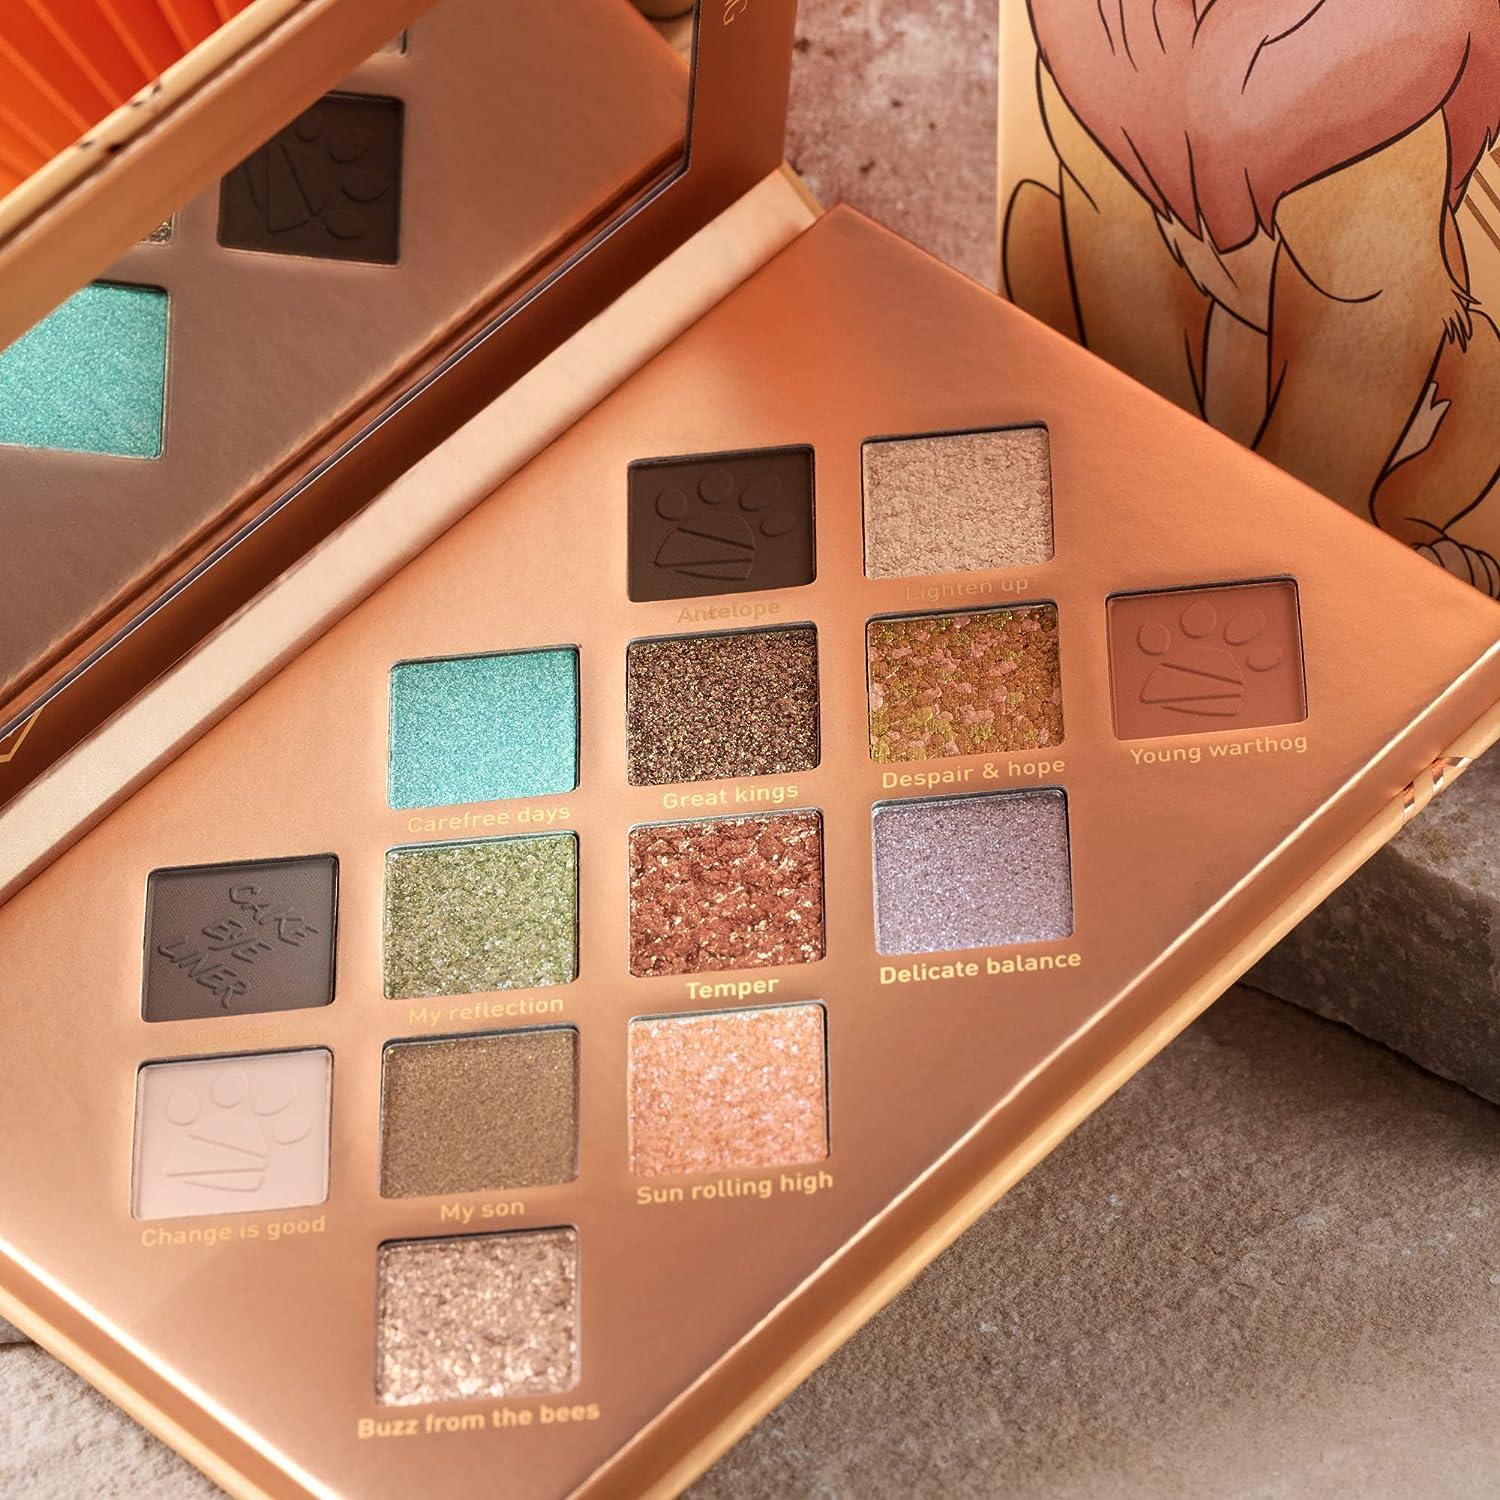 essence | The Lion King Eyeshadow Palette | Limited Edition Disney  Collection | 14 Highly Pigmented Easy to Blend Shadows | Matte & Metallic |  Vegan & Cruelty Free | Paraben Oil